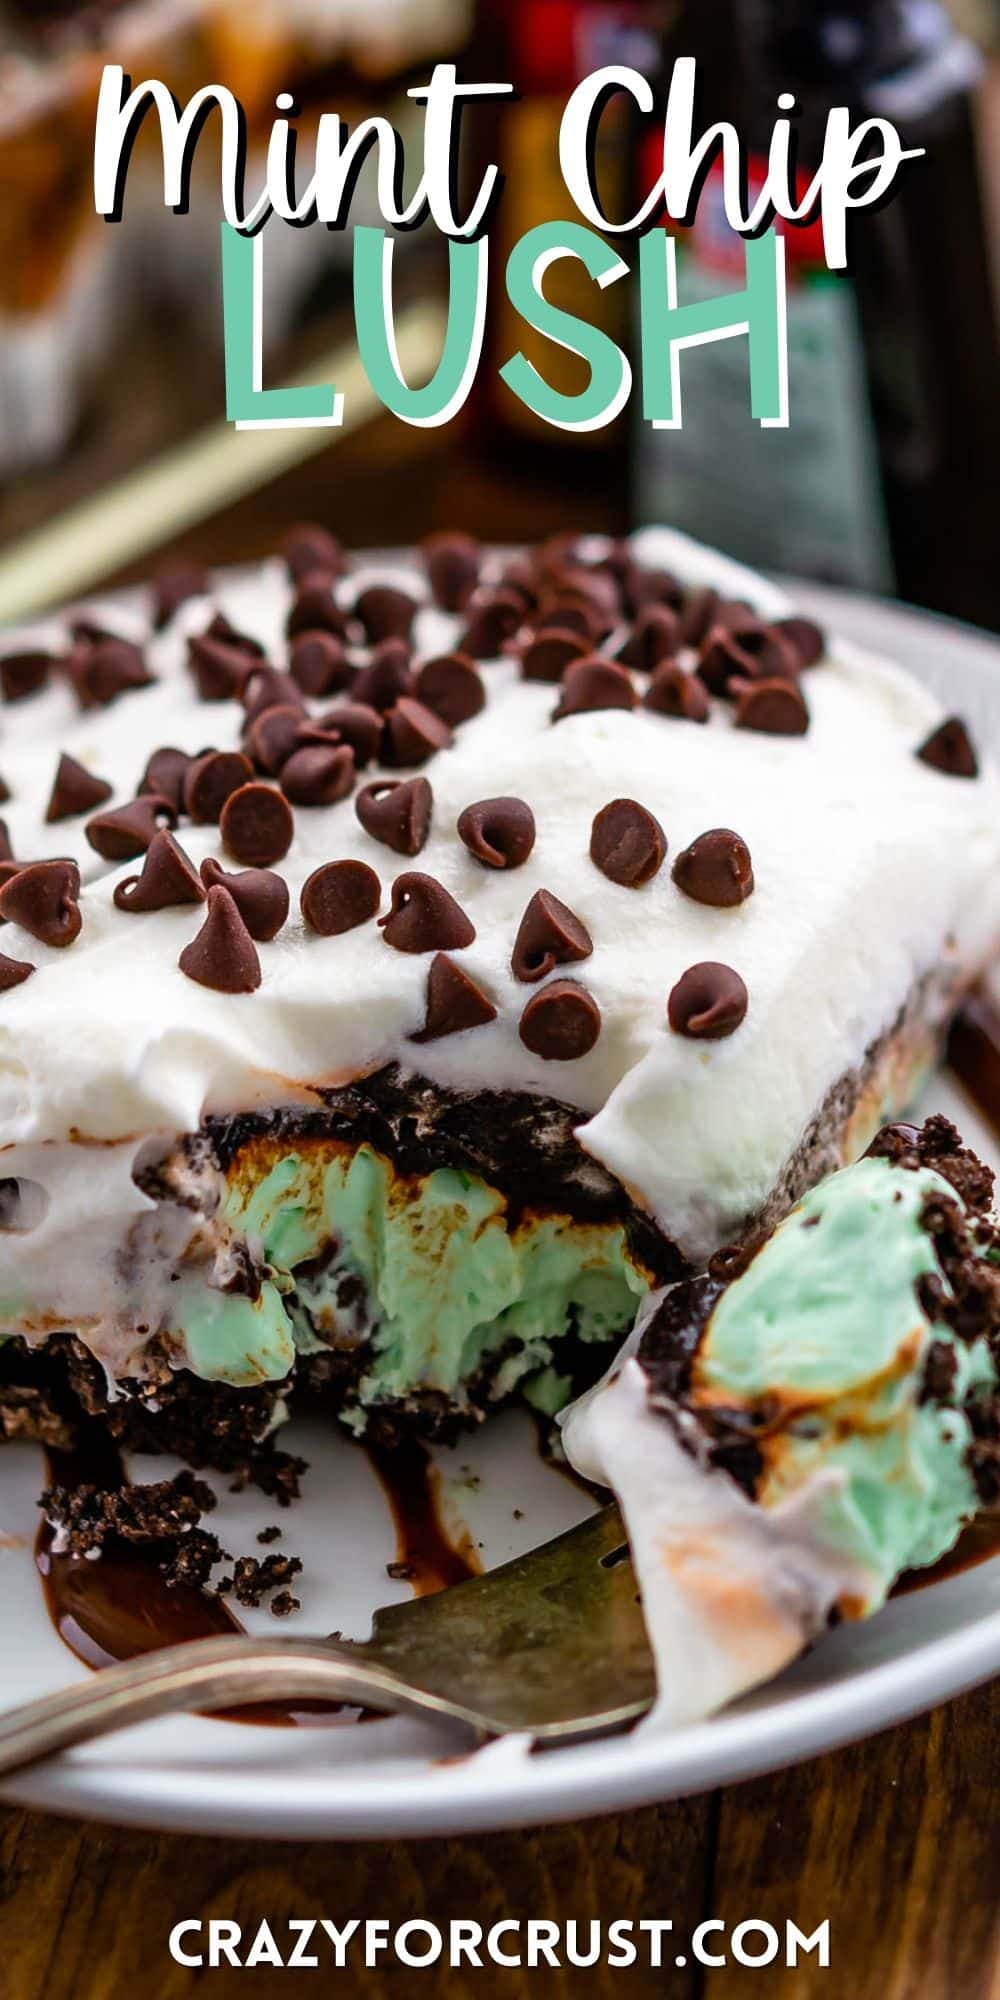 mint lush covered with whipped cream and chocolate chips with words on the image.